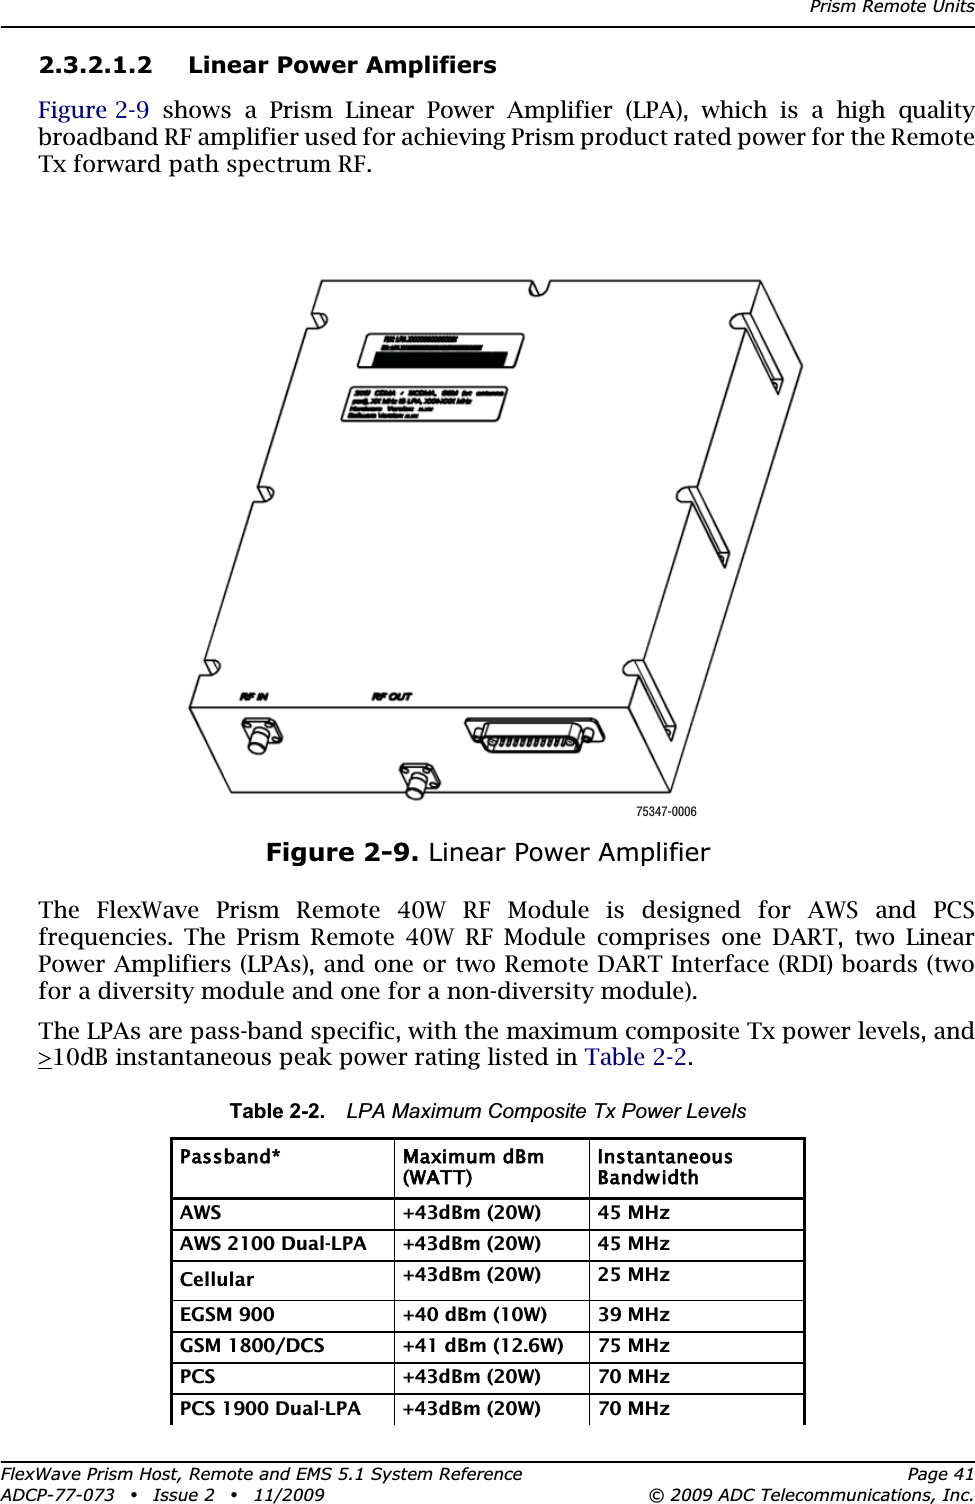 Prism Remote UnitsFlexWave Prism Host, Remote and EMS 5.1 System Reference Page 41ADCP-77-073 • Issue 2 • 11/2009 © 2009 ADC Telecommunications, Inc.2.3.2.1.2 Linear Power AmplifiersFigure 2-9 shows a Prism Linear Power Amplifier (LPA), which is a high quality broadband RF amplifier used for achieving Prism product rated power for the Remote Tx forward path spectrum RF. Figure 2-9. Linear Power AmplifierThe FlexWave Prism Remote 40W RF Module is designed for AWS and PCS frequencies. The Prism Remote 40W RF Module comprises one DART, two Linear Power Amplifiers (LPAs), and one or two Remote DART Interface (RDI) boards (two for a diversity module and one for a non-diversity module).The LPAs are pass-band specific, with the maximum composite Tx power levels, and &gt;10dB instantaneous peak power rating listed in Table 2-2.Table 2-2. LPA Maximum Composite Tx Power LevelsPassband* Maximum dBm (WATT)InstantaneousBandwidthAWS +43dBm (20W) 45 MHzAWS 2100 Dual-LPA +43dBm (20W) 45 MHzCellular +43dBm (20W) 25 MHzEGSM 900 +40 dBm (10W) 39 MHz GSM 1800/DCS  +41 dBm (12.6W) 75 MHzPCS +43dBm (20W) 70 MHzPCS 1900 Dual-LPA +43dBm (20W) 70 MHz75347-0006